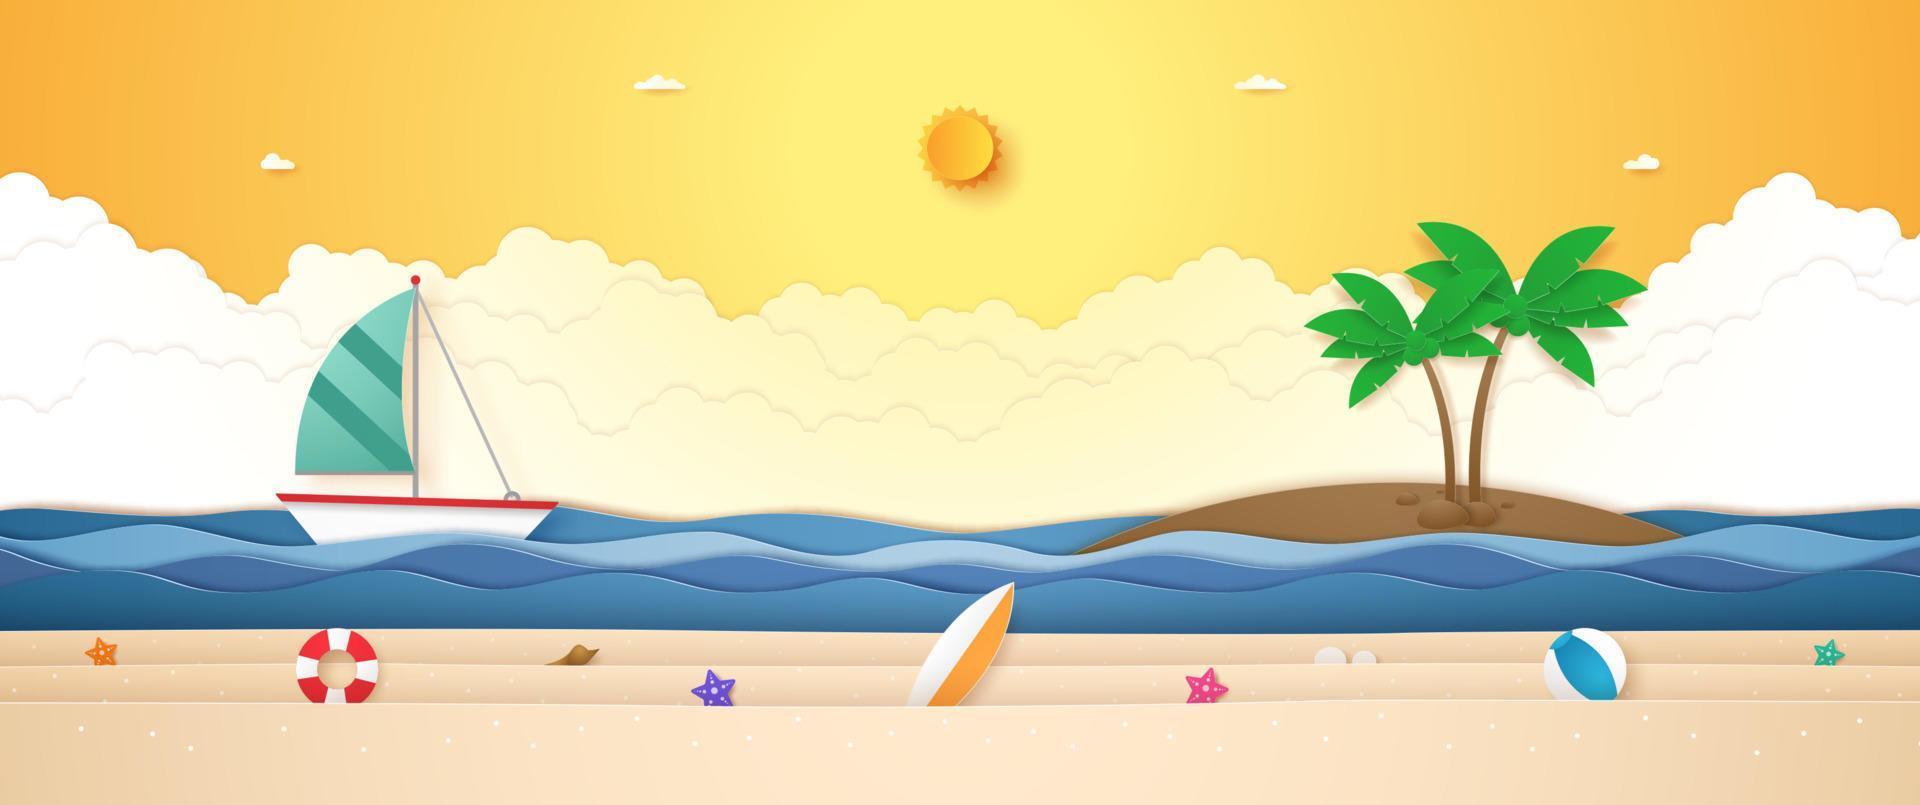 Landscape of boat sailing on wavy sea, coconut tree on island and summer stuff on beach with bright sun in sunshine sky for Summer in paper art style vector